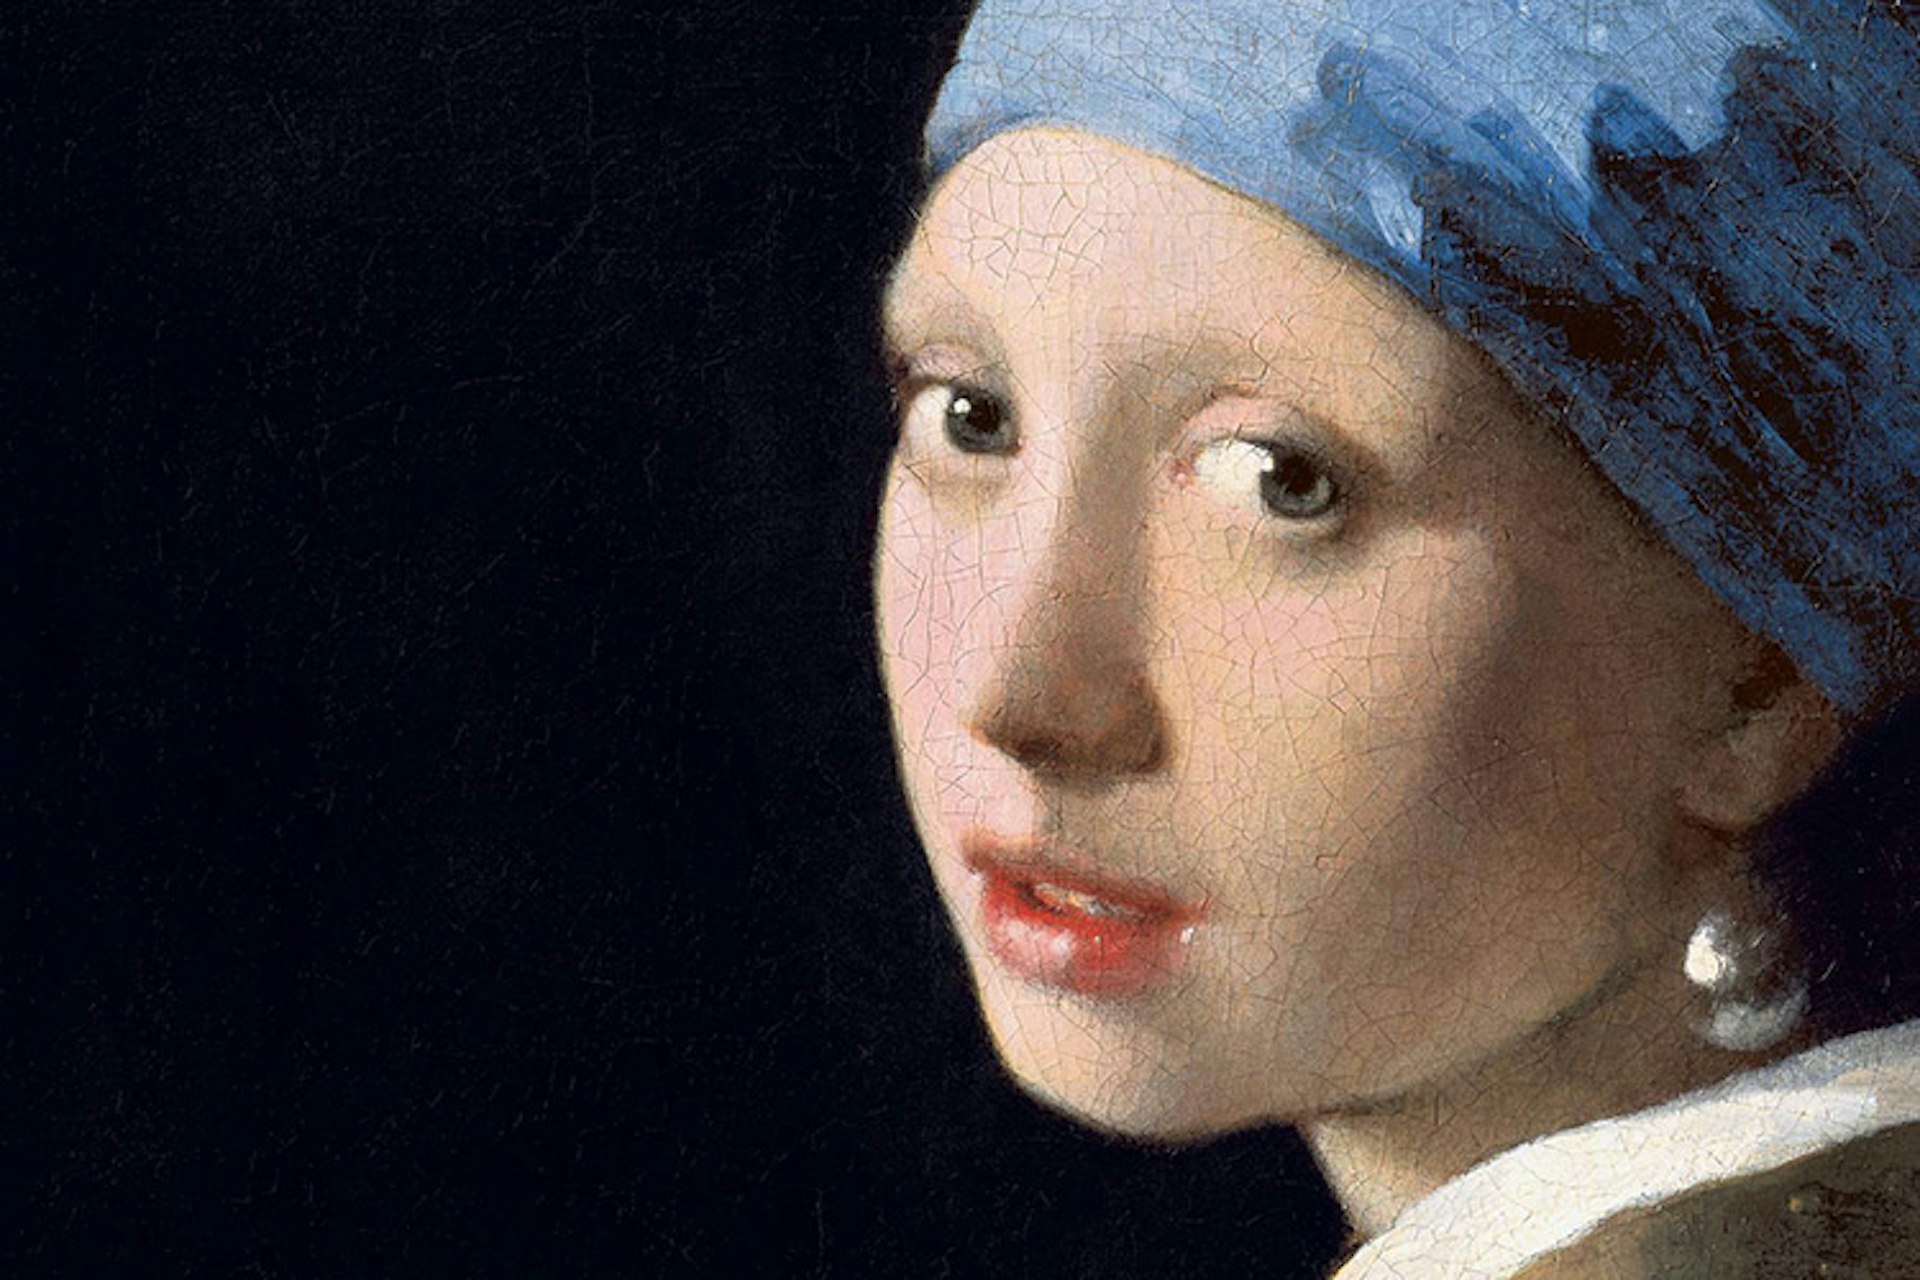 A detail from Vermeer's Girl With a Pearl Earring, the inspiration for a bestselling book. Image from Wikimedia Commons